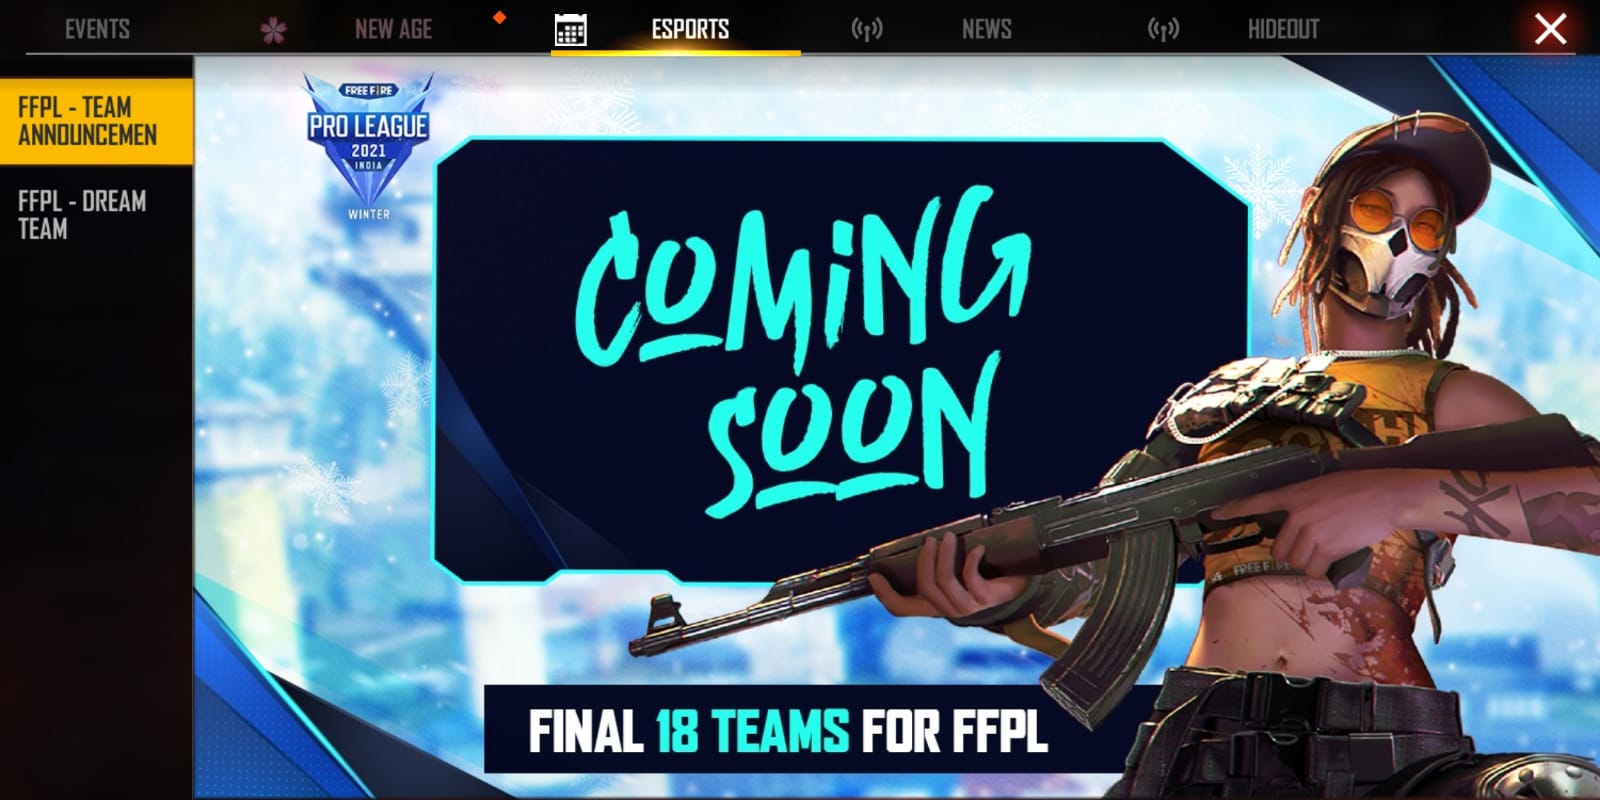 Free Fire Pro League 2021 Winter: Final 18 Teams for FFPL 2021 Winter is coming soon, Check More Details on the competition